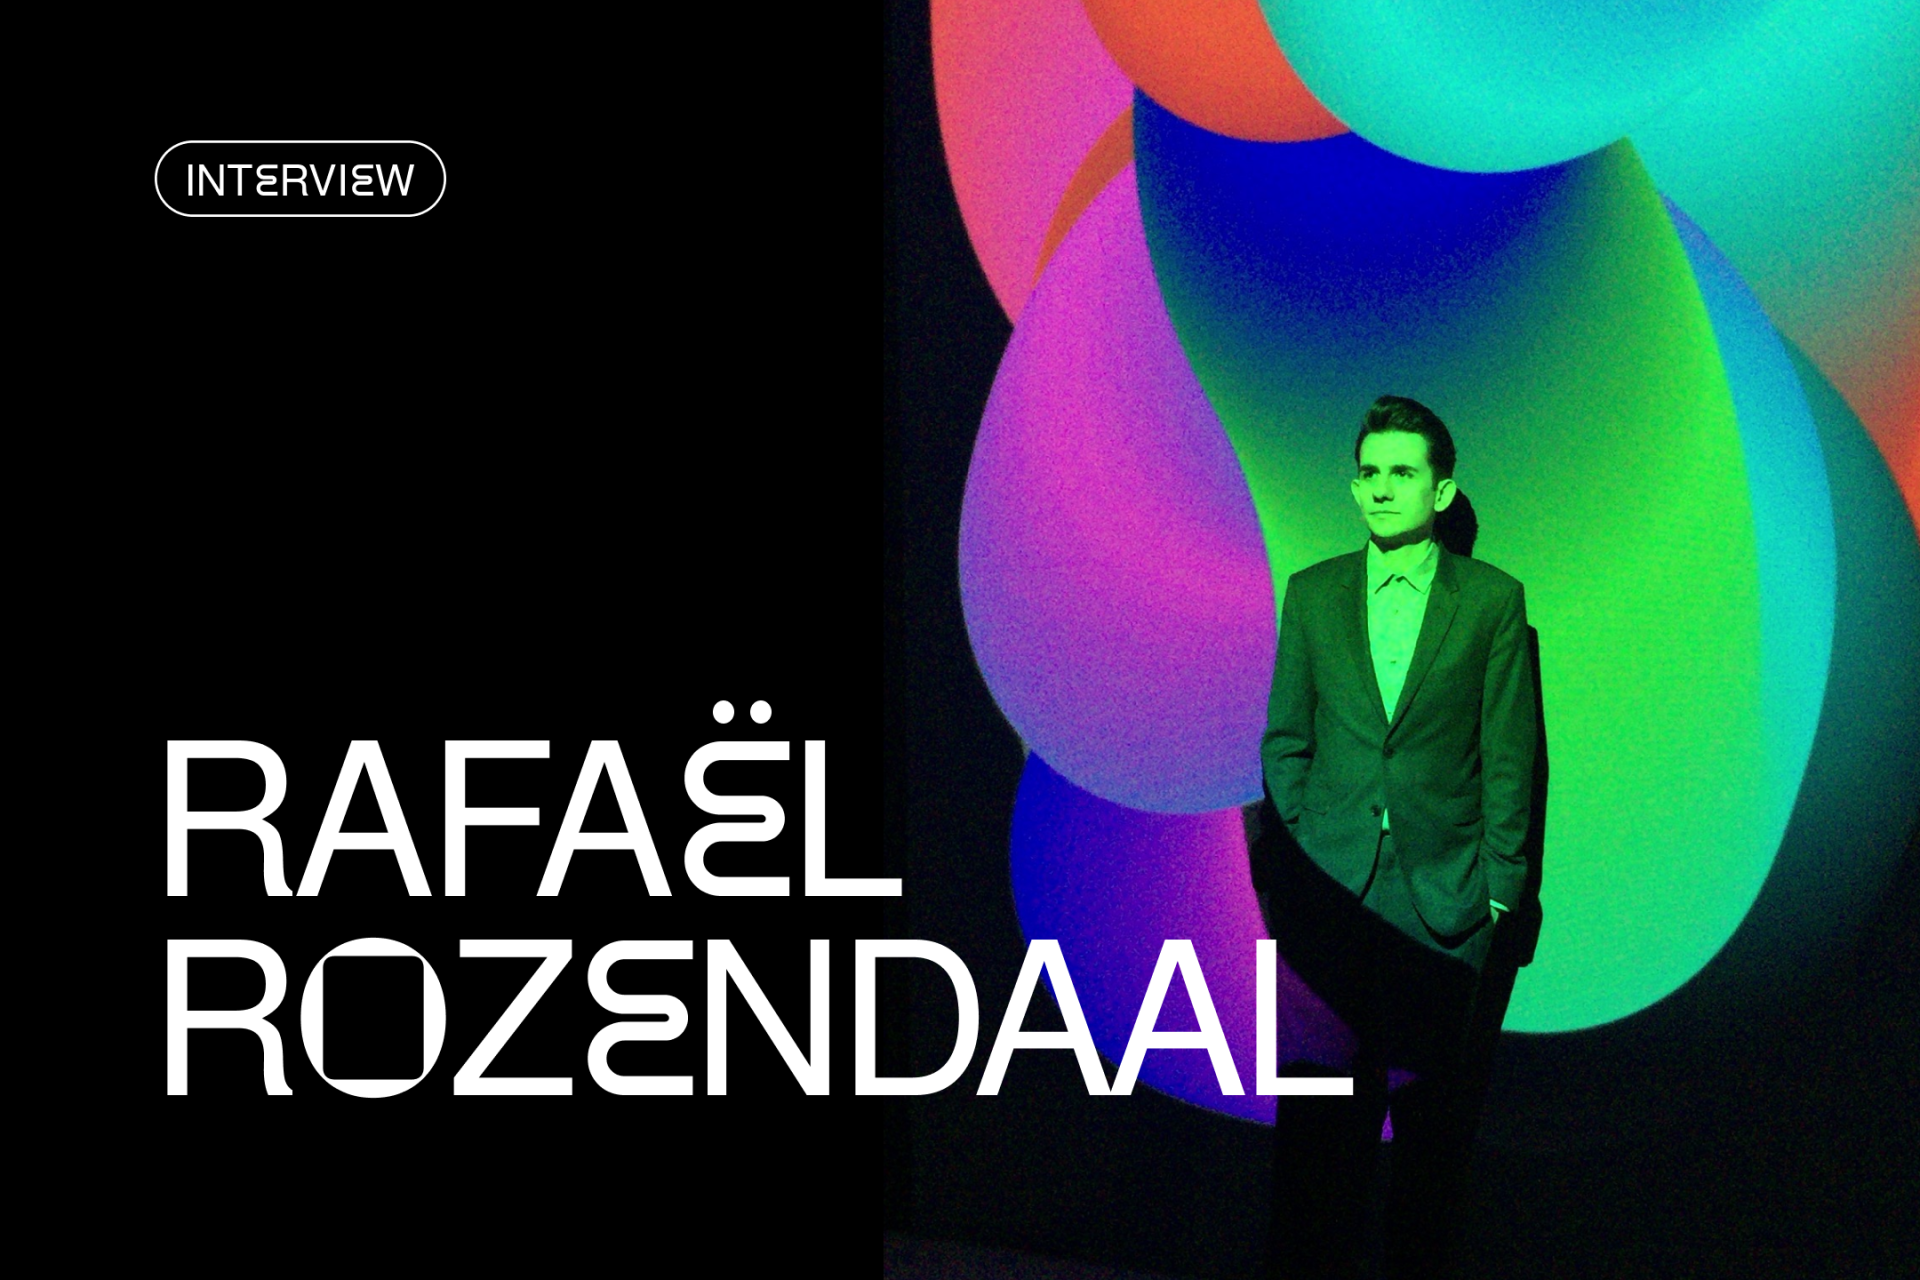 Rafaël Rozendaal on how digital art is always with you.